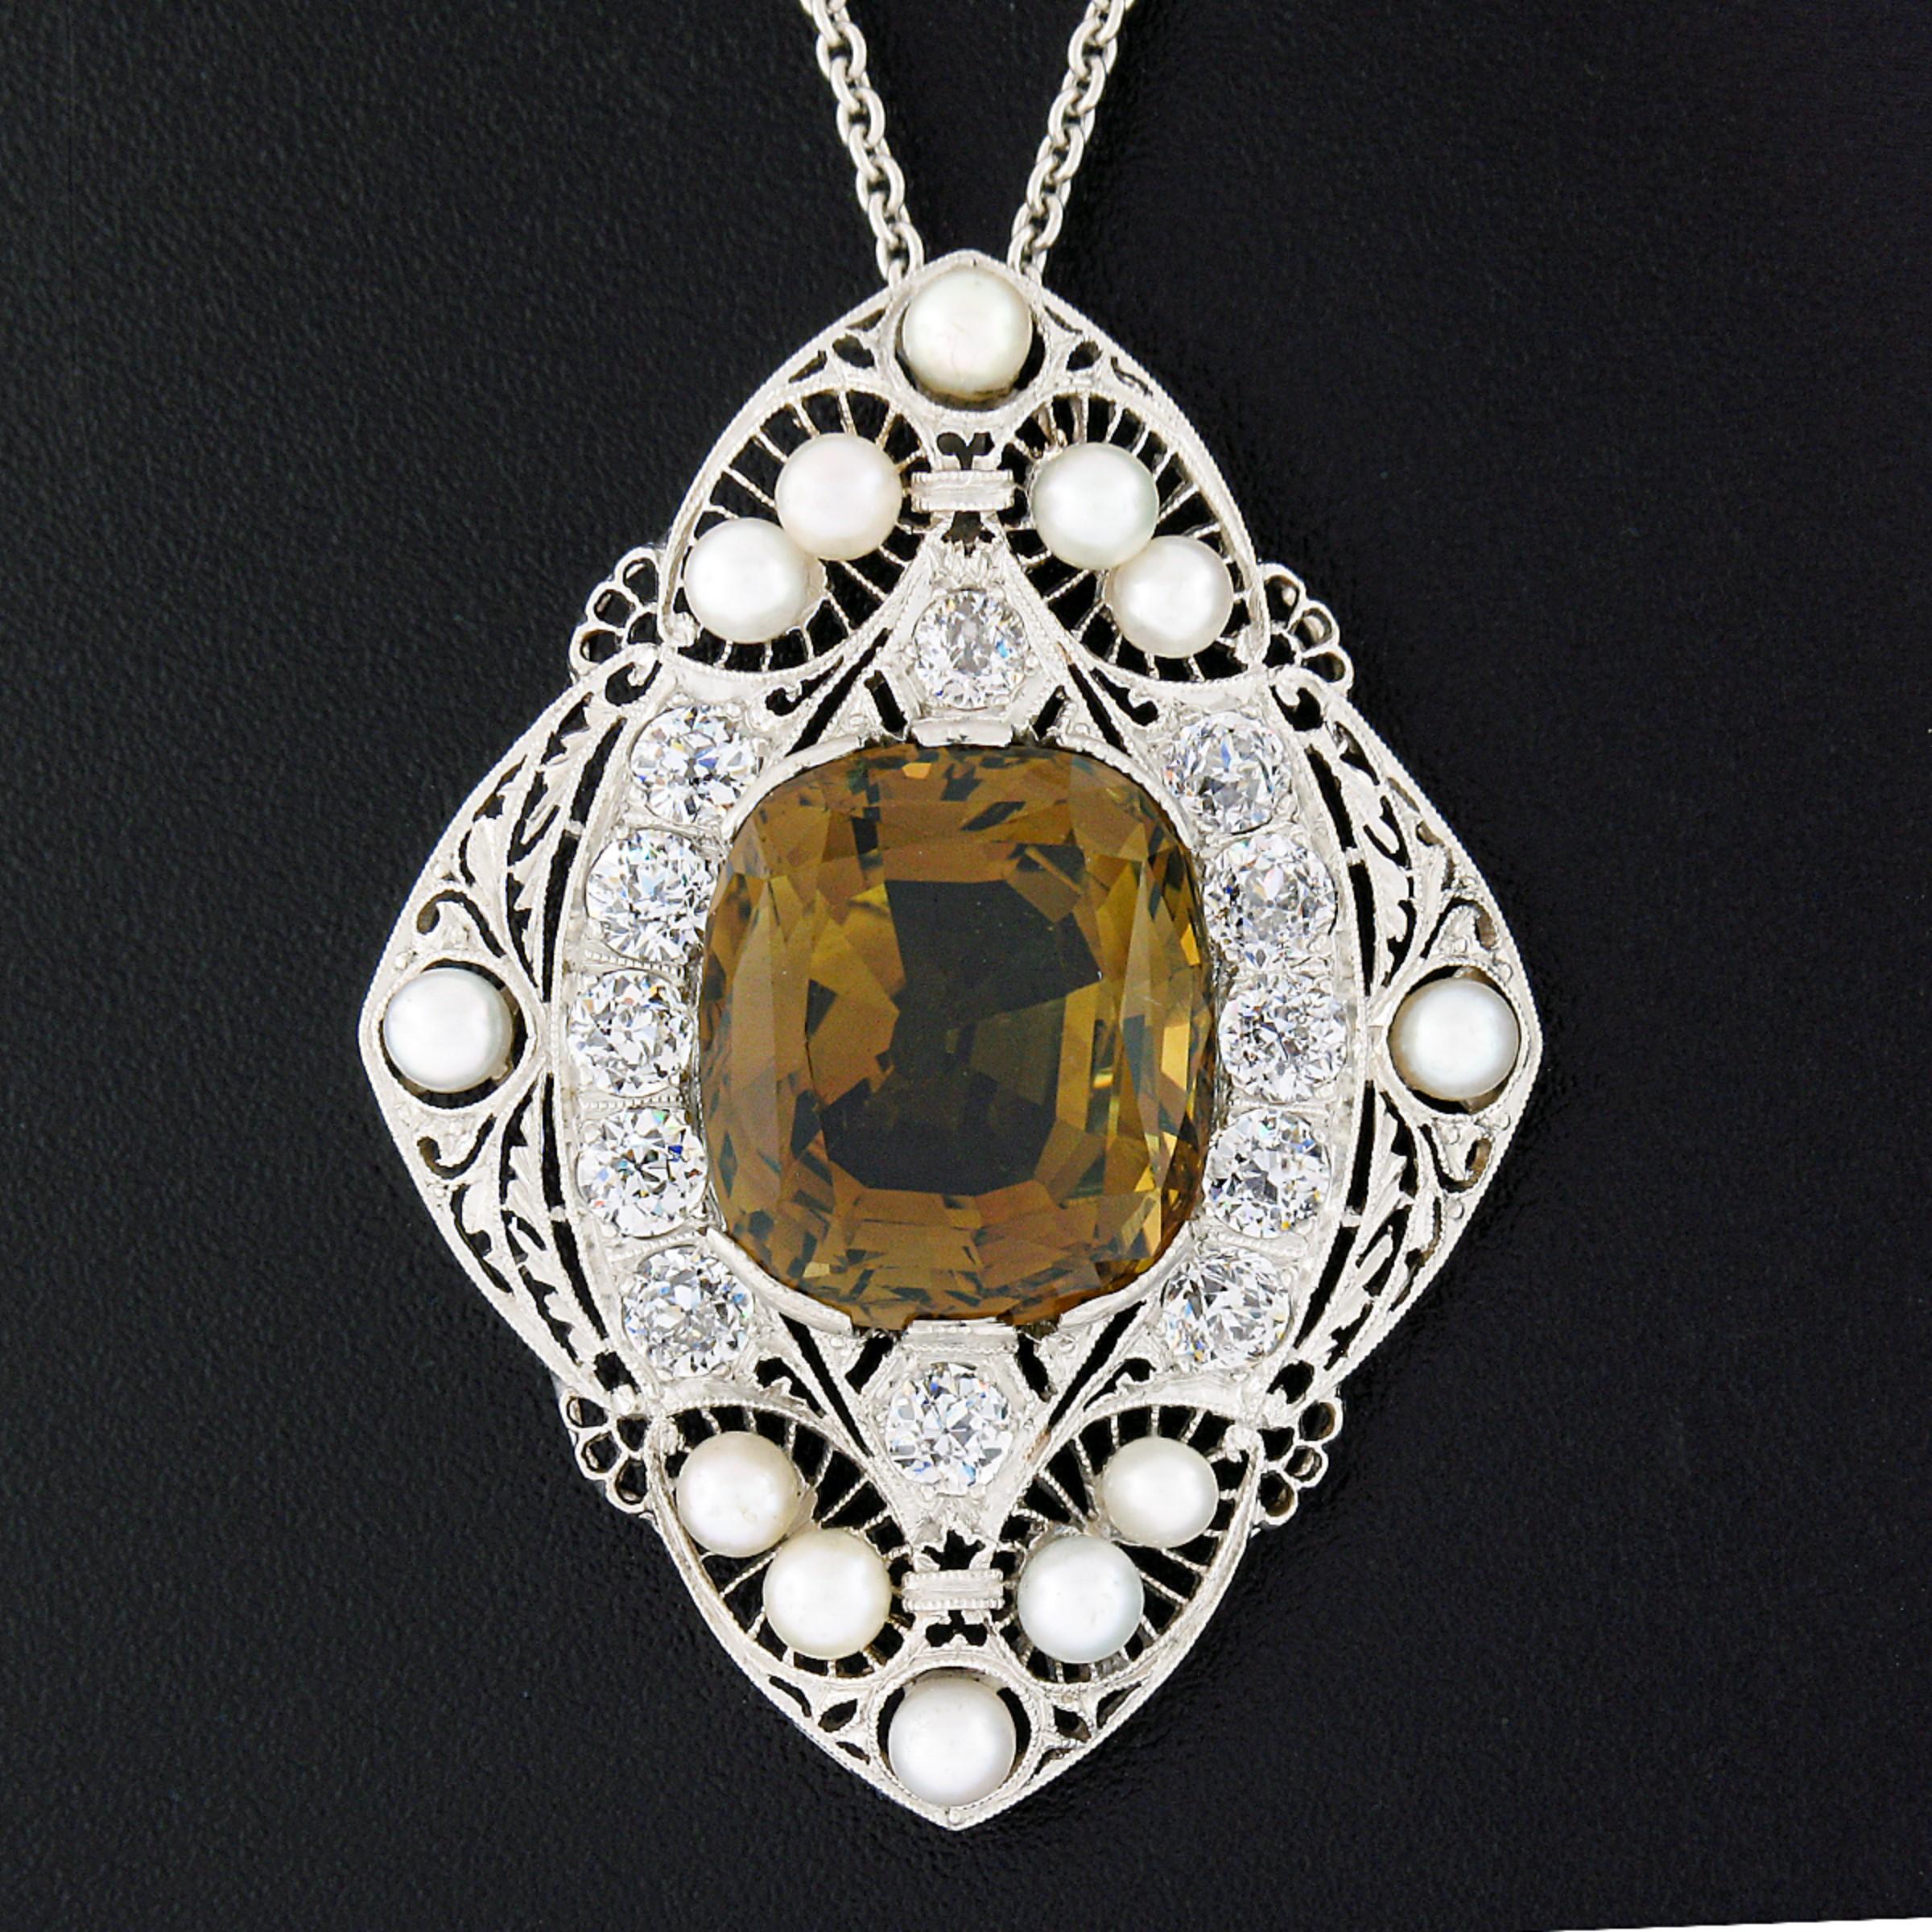 This breathtaking antique pendant was crafted in solid platinum during the Edwardian era and features a large and incredibly detailed design that carries fine quality stones throughout. It features a gorgeous, GIA certified, natural chrysoberyl